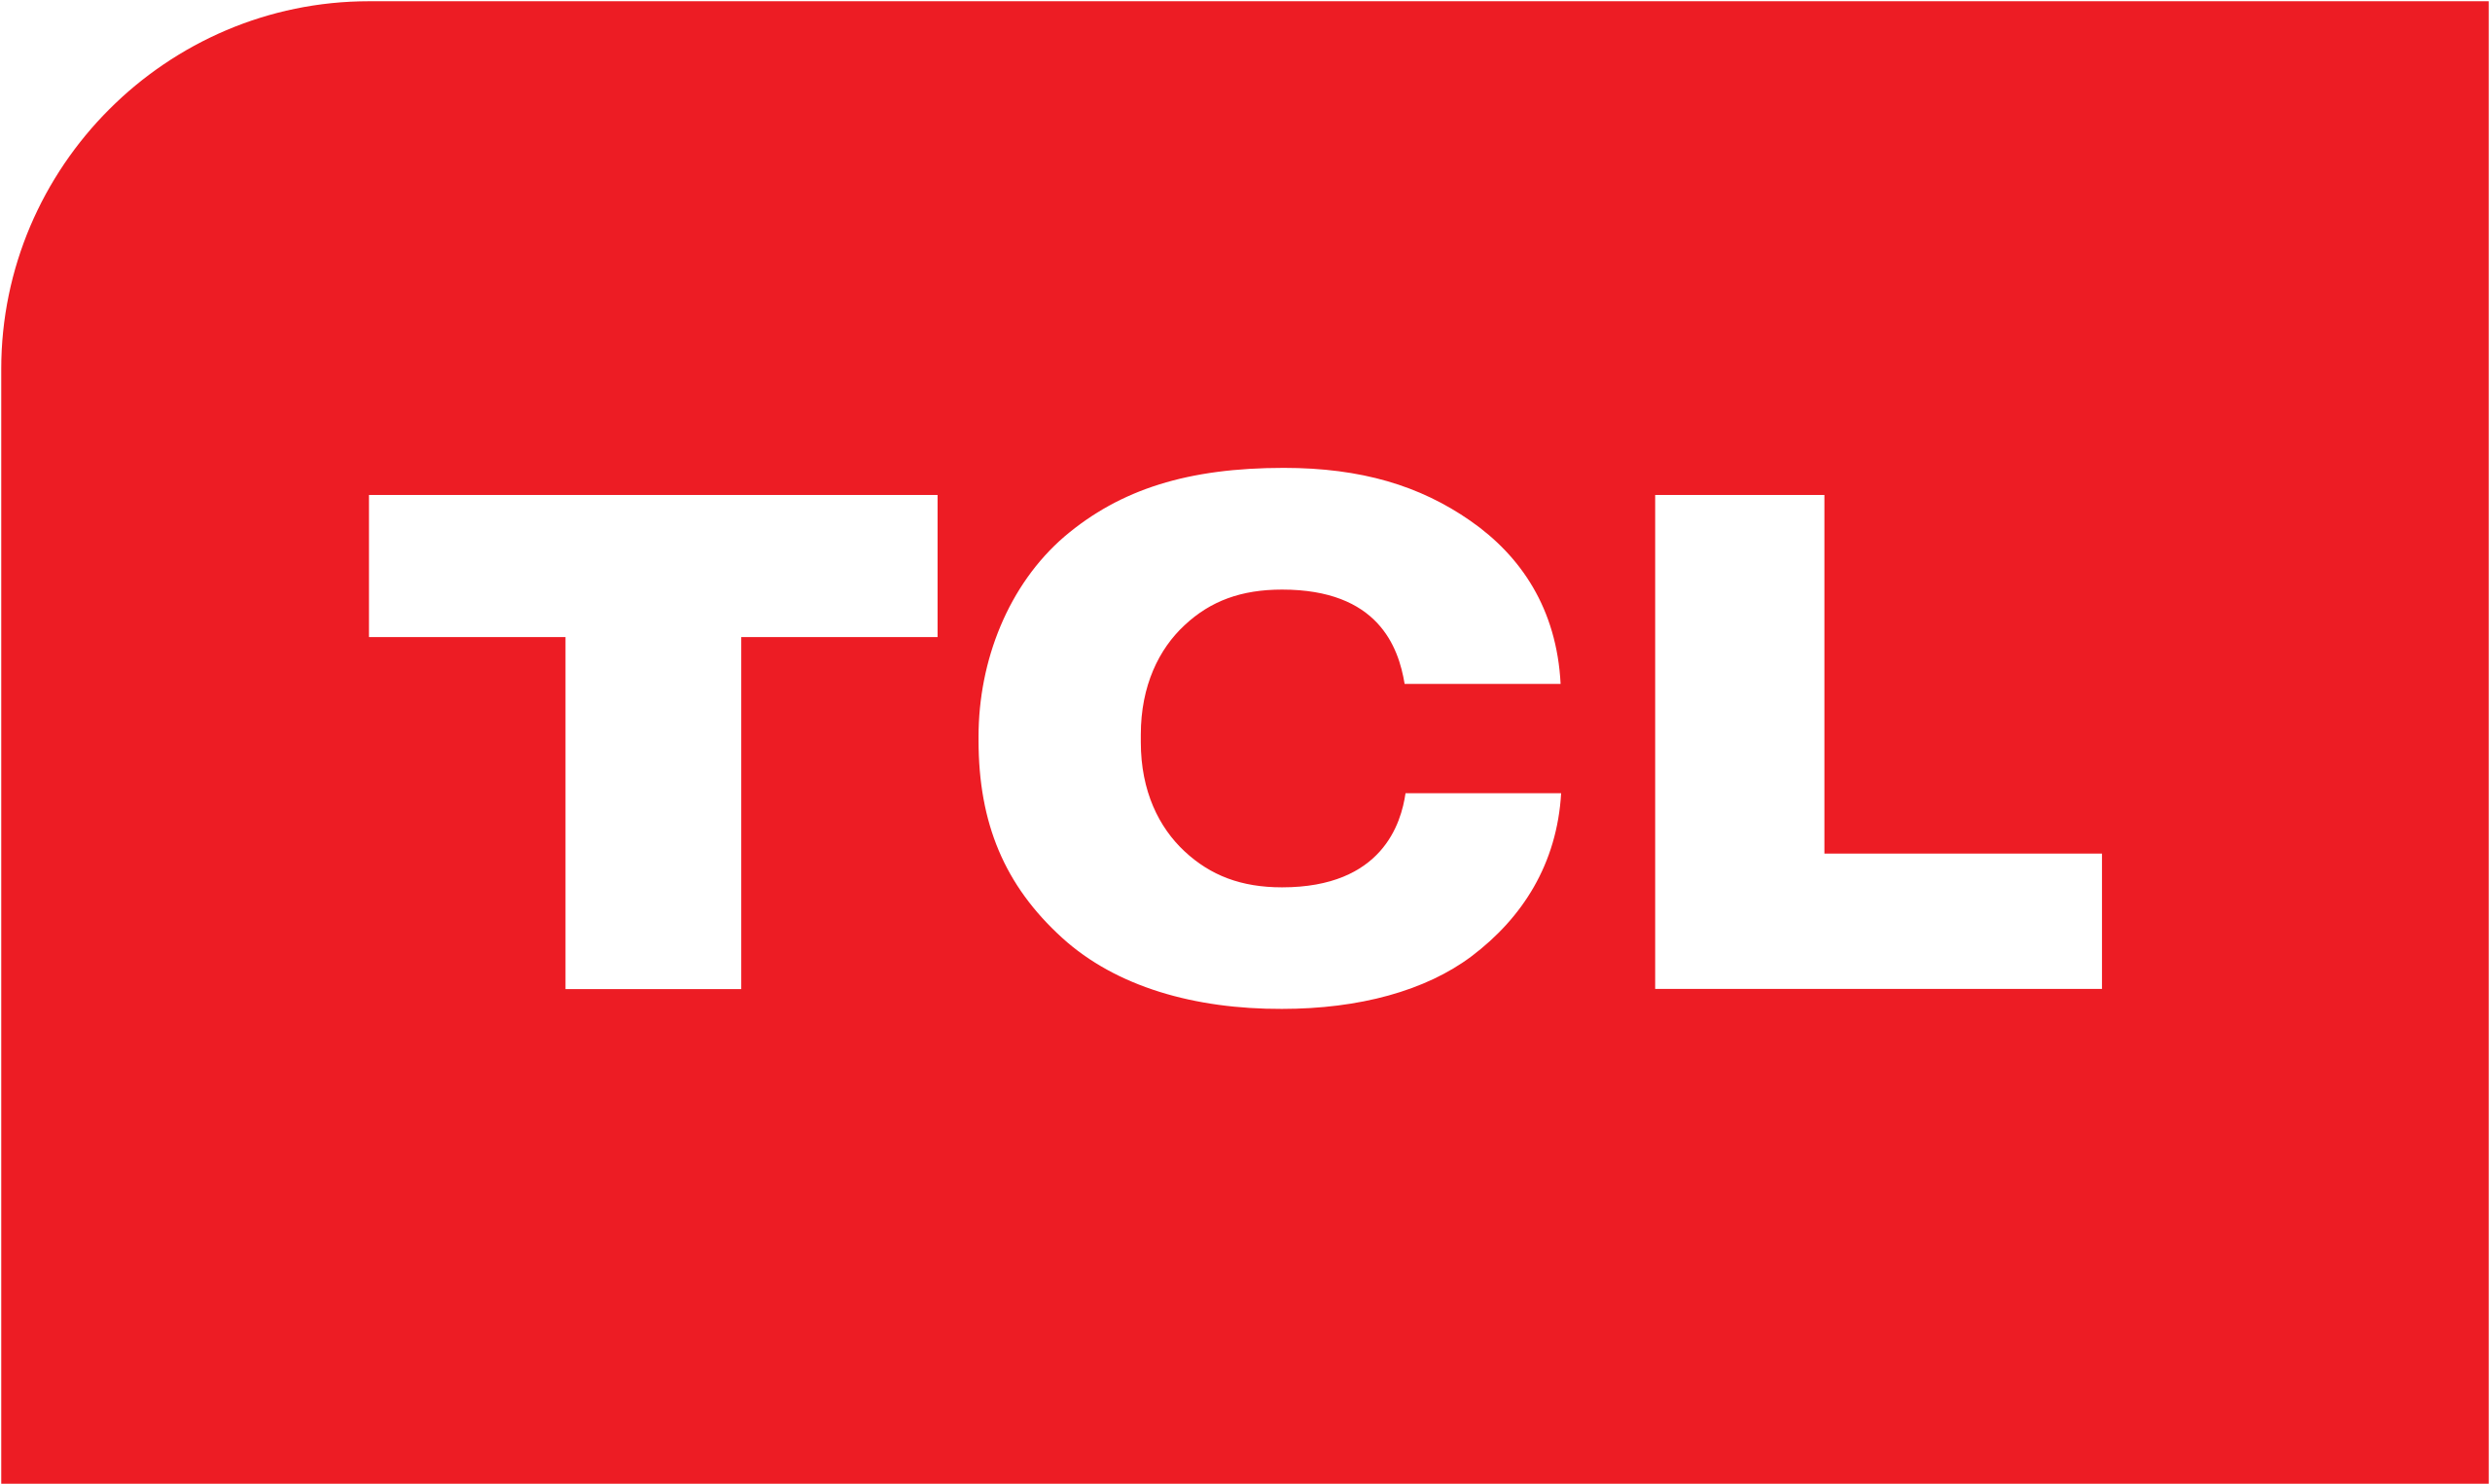 File:Logo of the TCL Corporation.svg - Wikimedia Commons